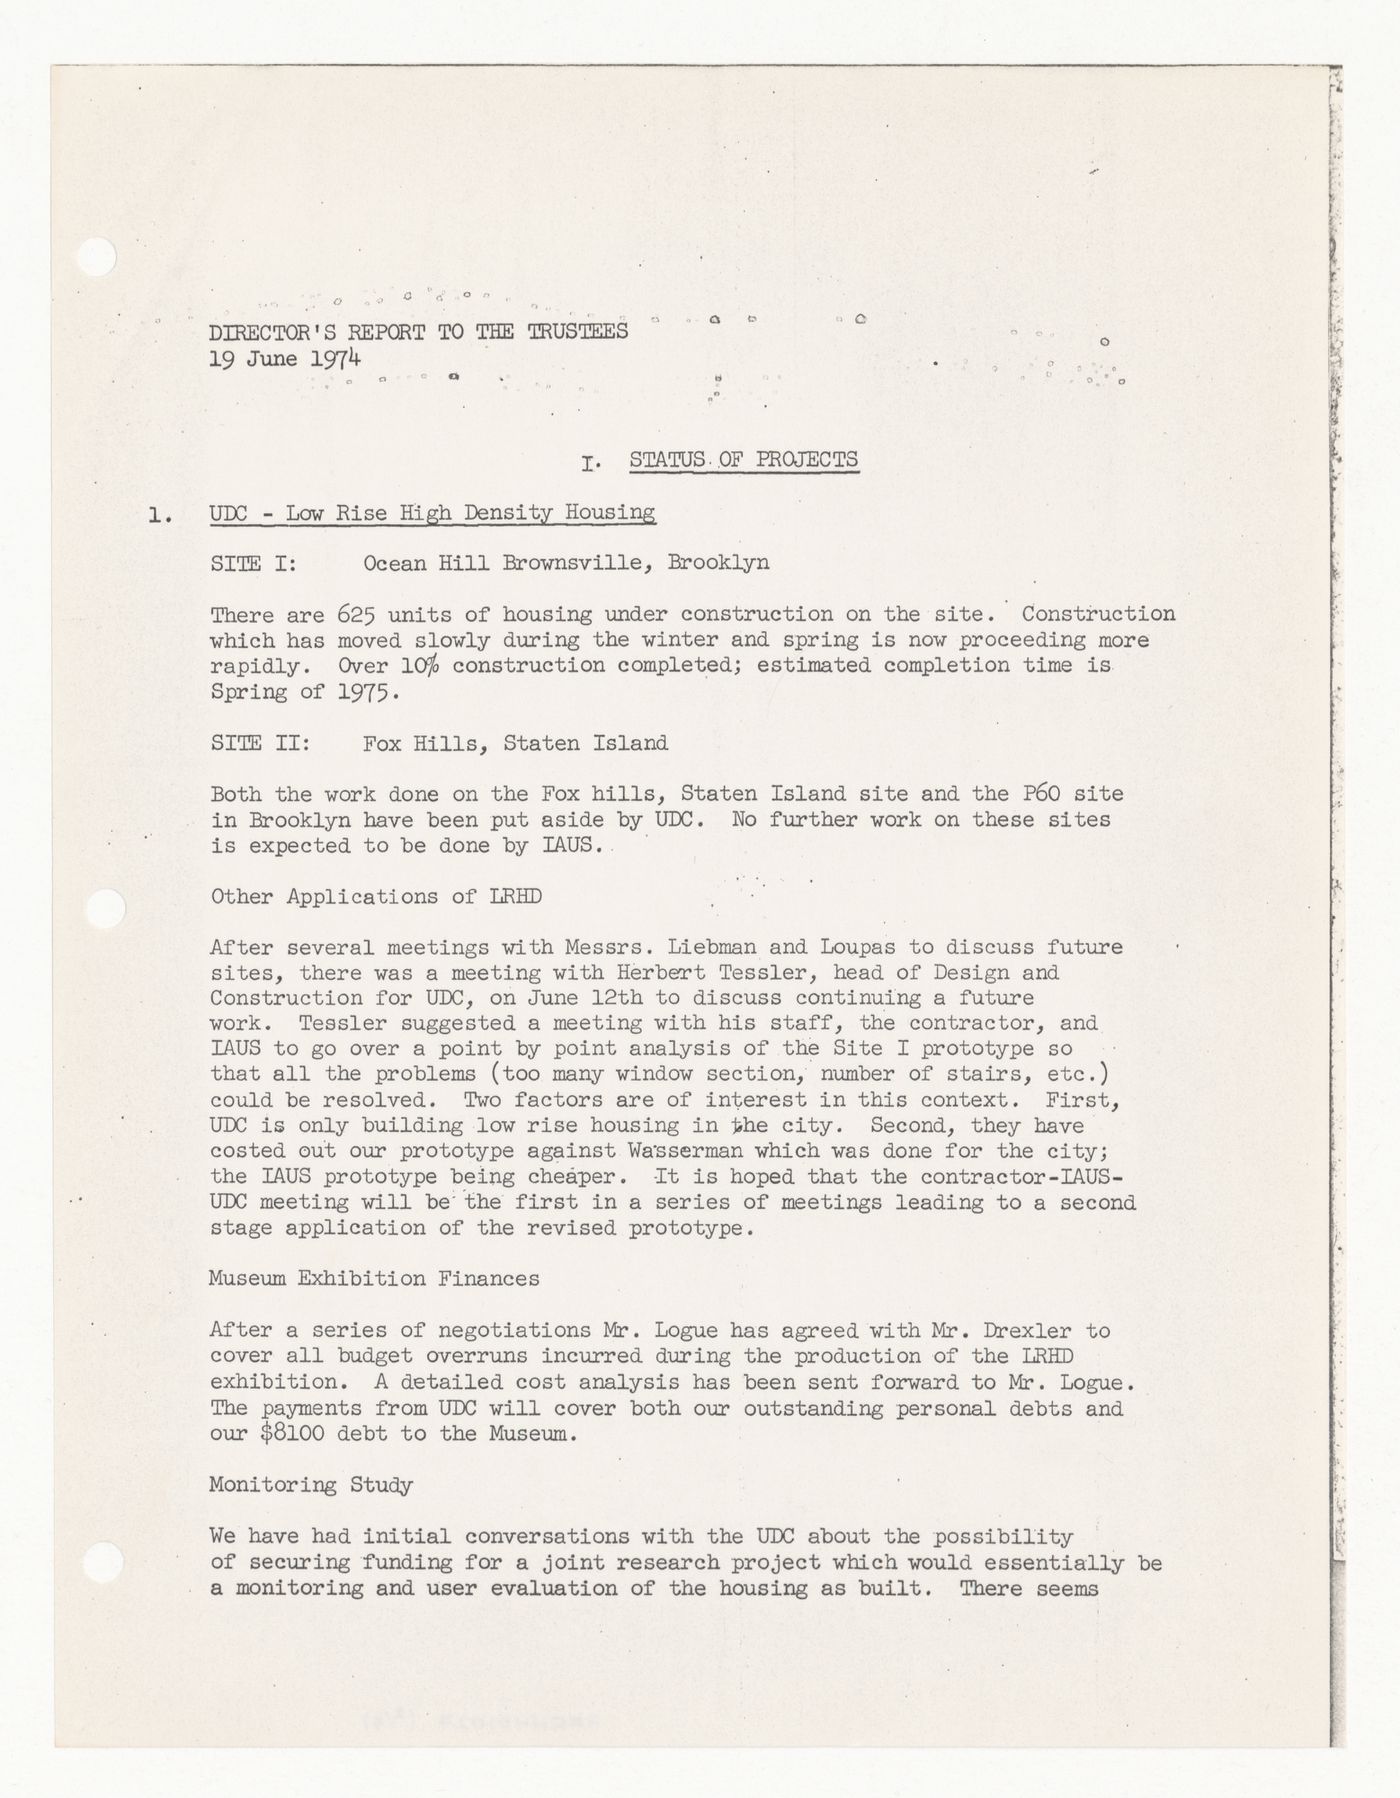 Director's report to the Trustees with annotations by Peter D. Eisenman